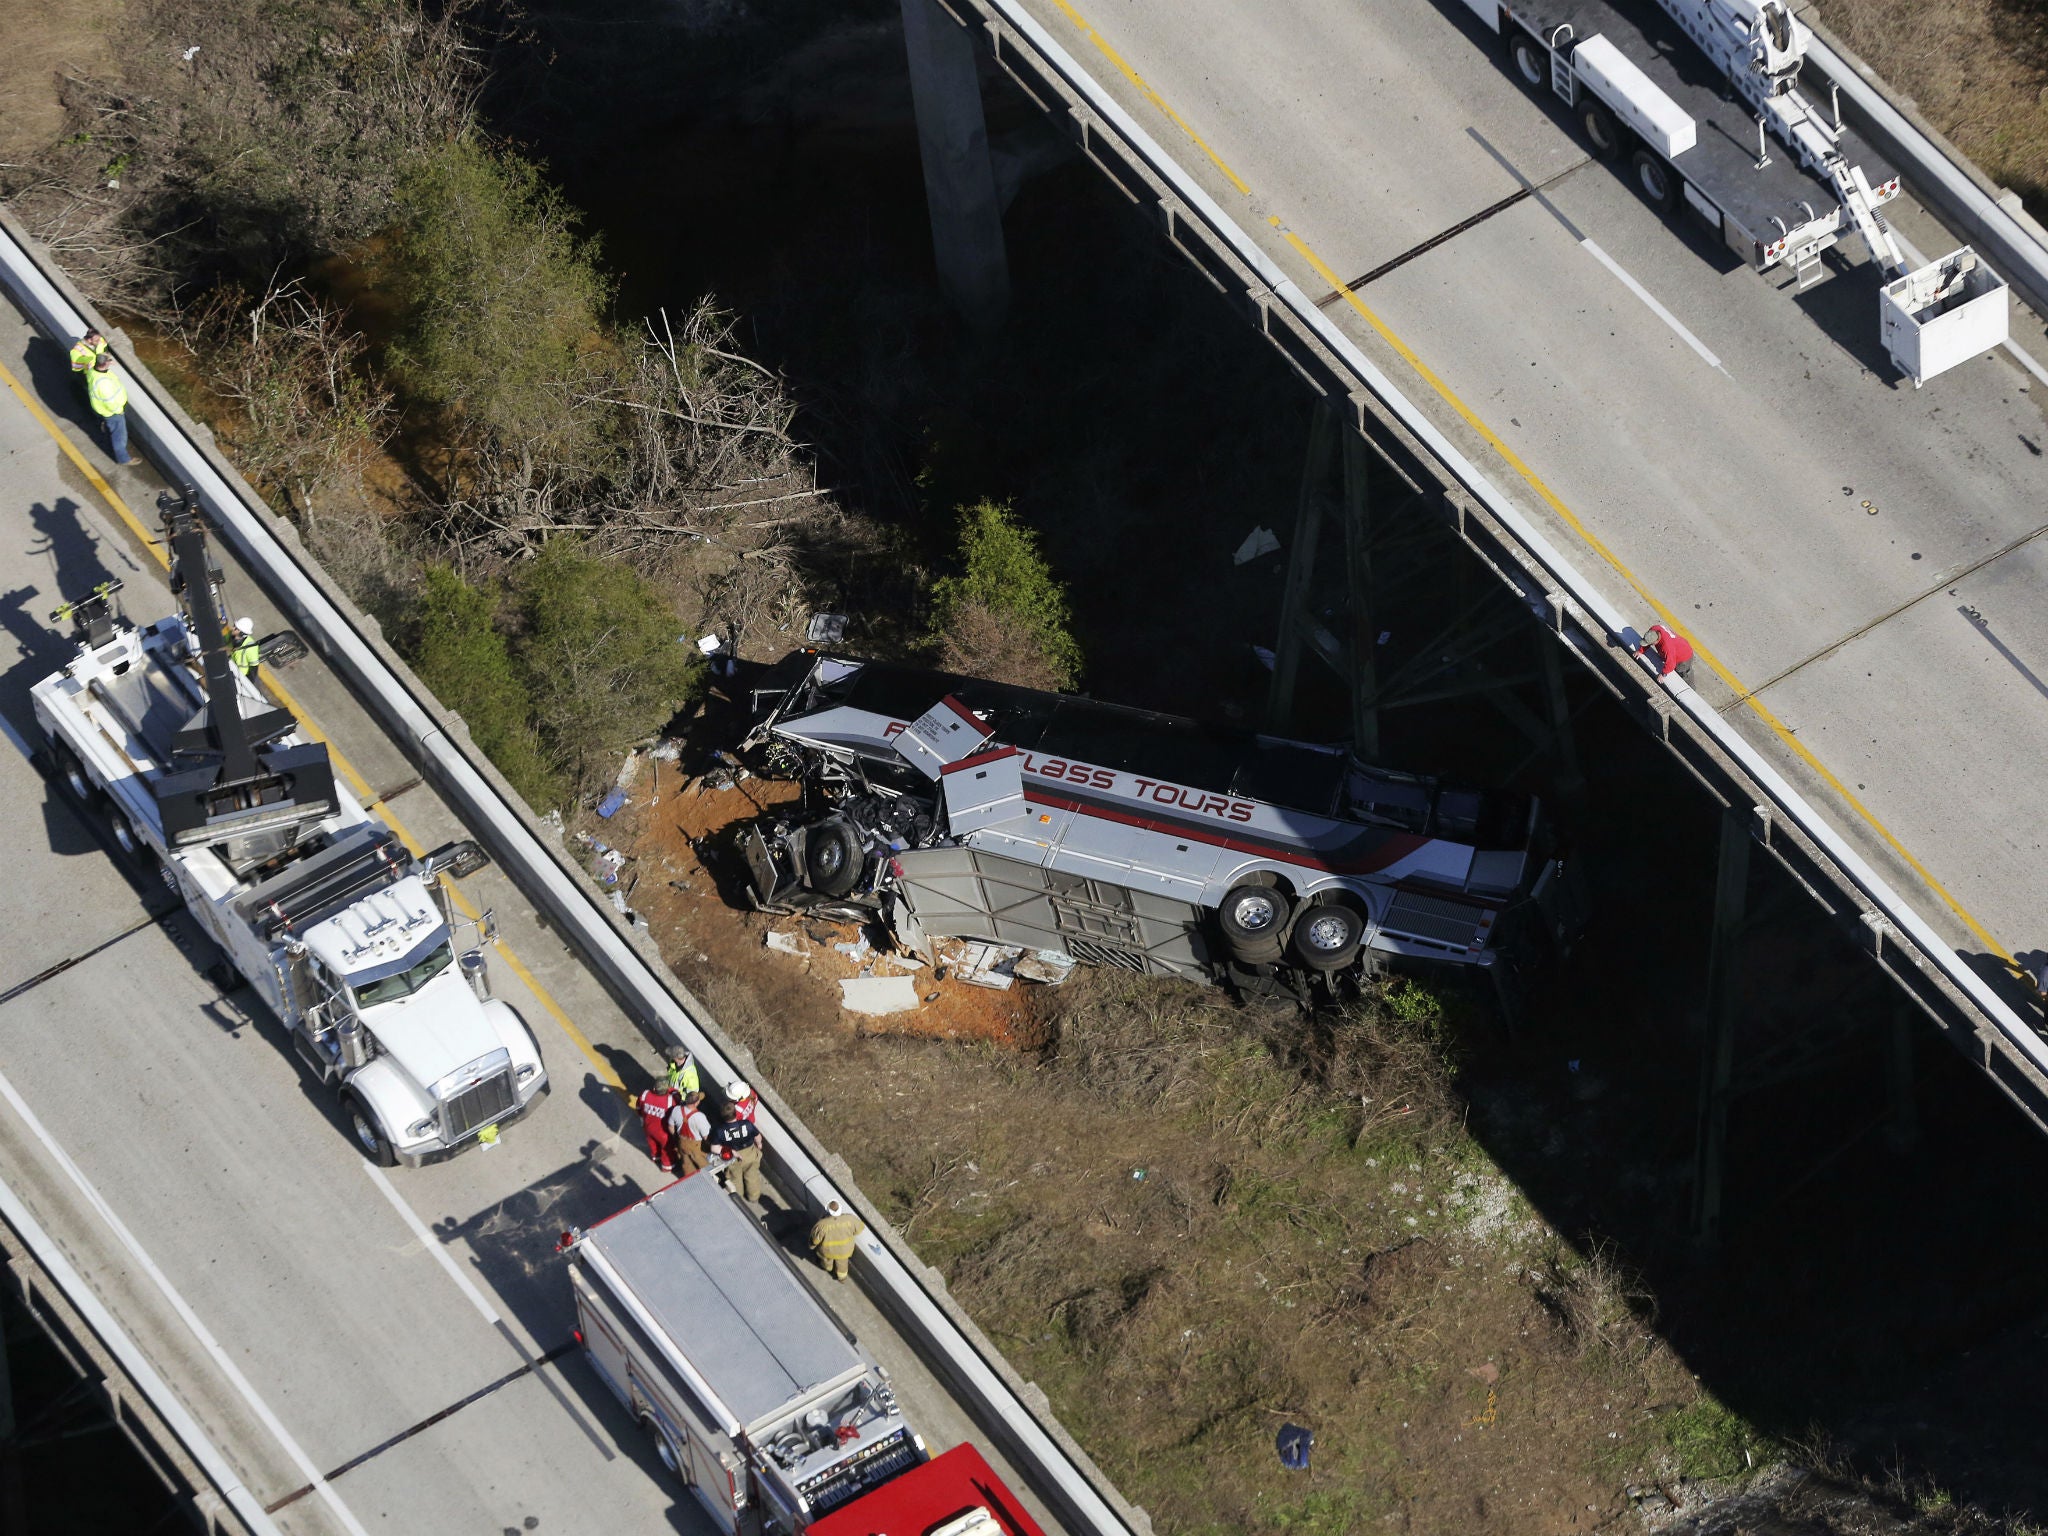 Rescue crews work at the scene of a deadly charter bus crash in Loxley, Alabama